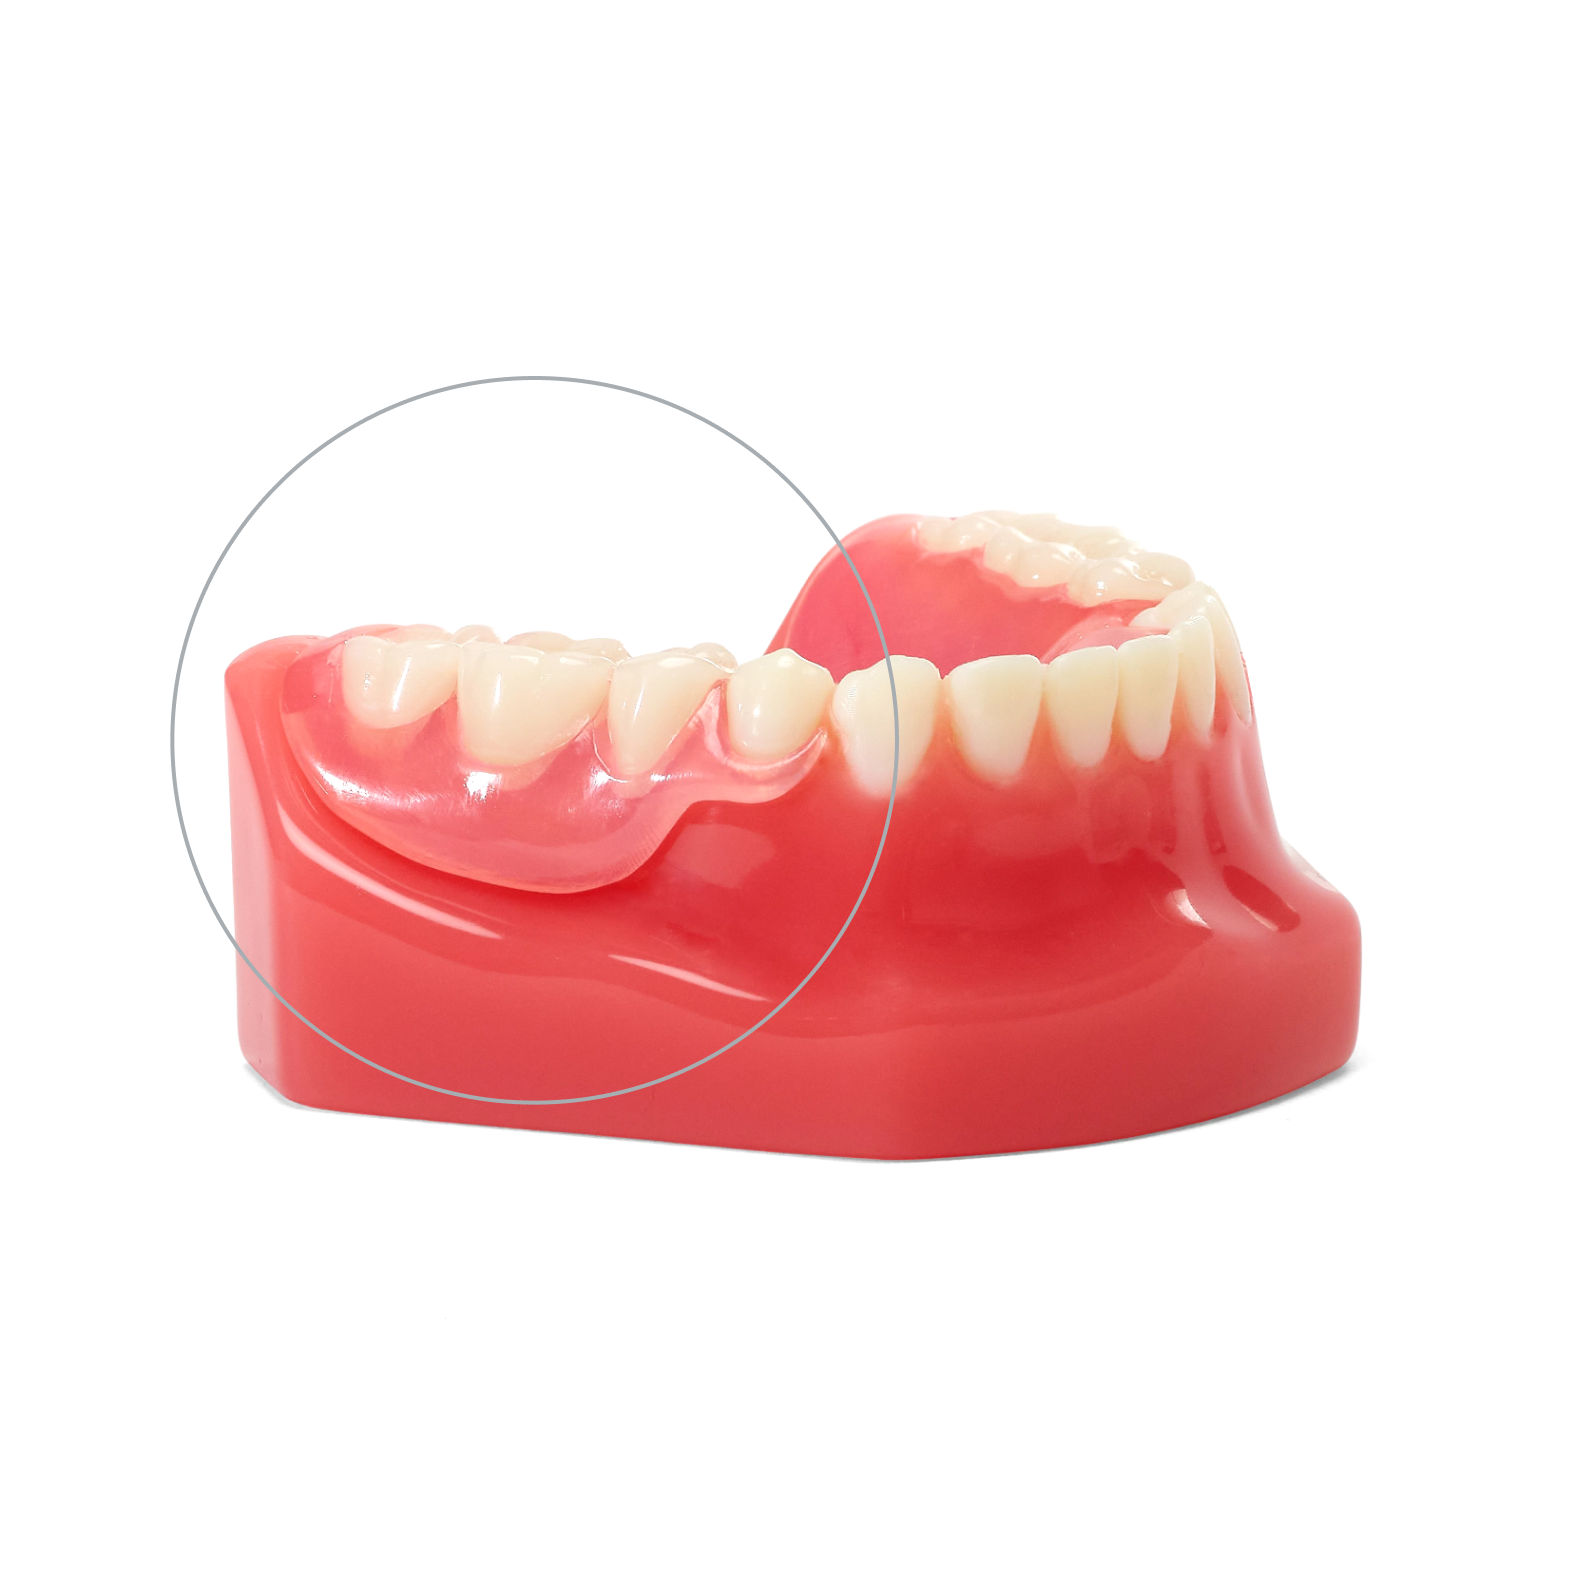 Flexilytes℠ partial dentures showcased on lower denture model, emphasizing tooth replacement on natural gums.